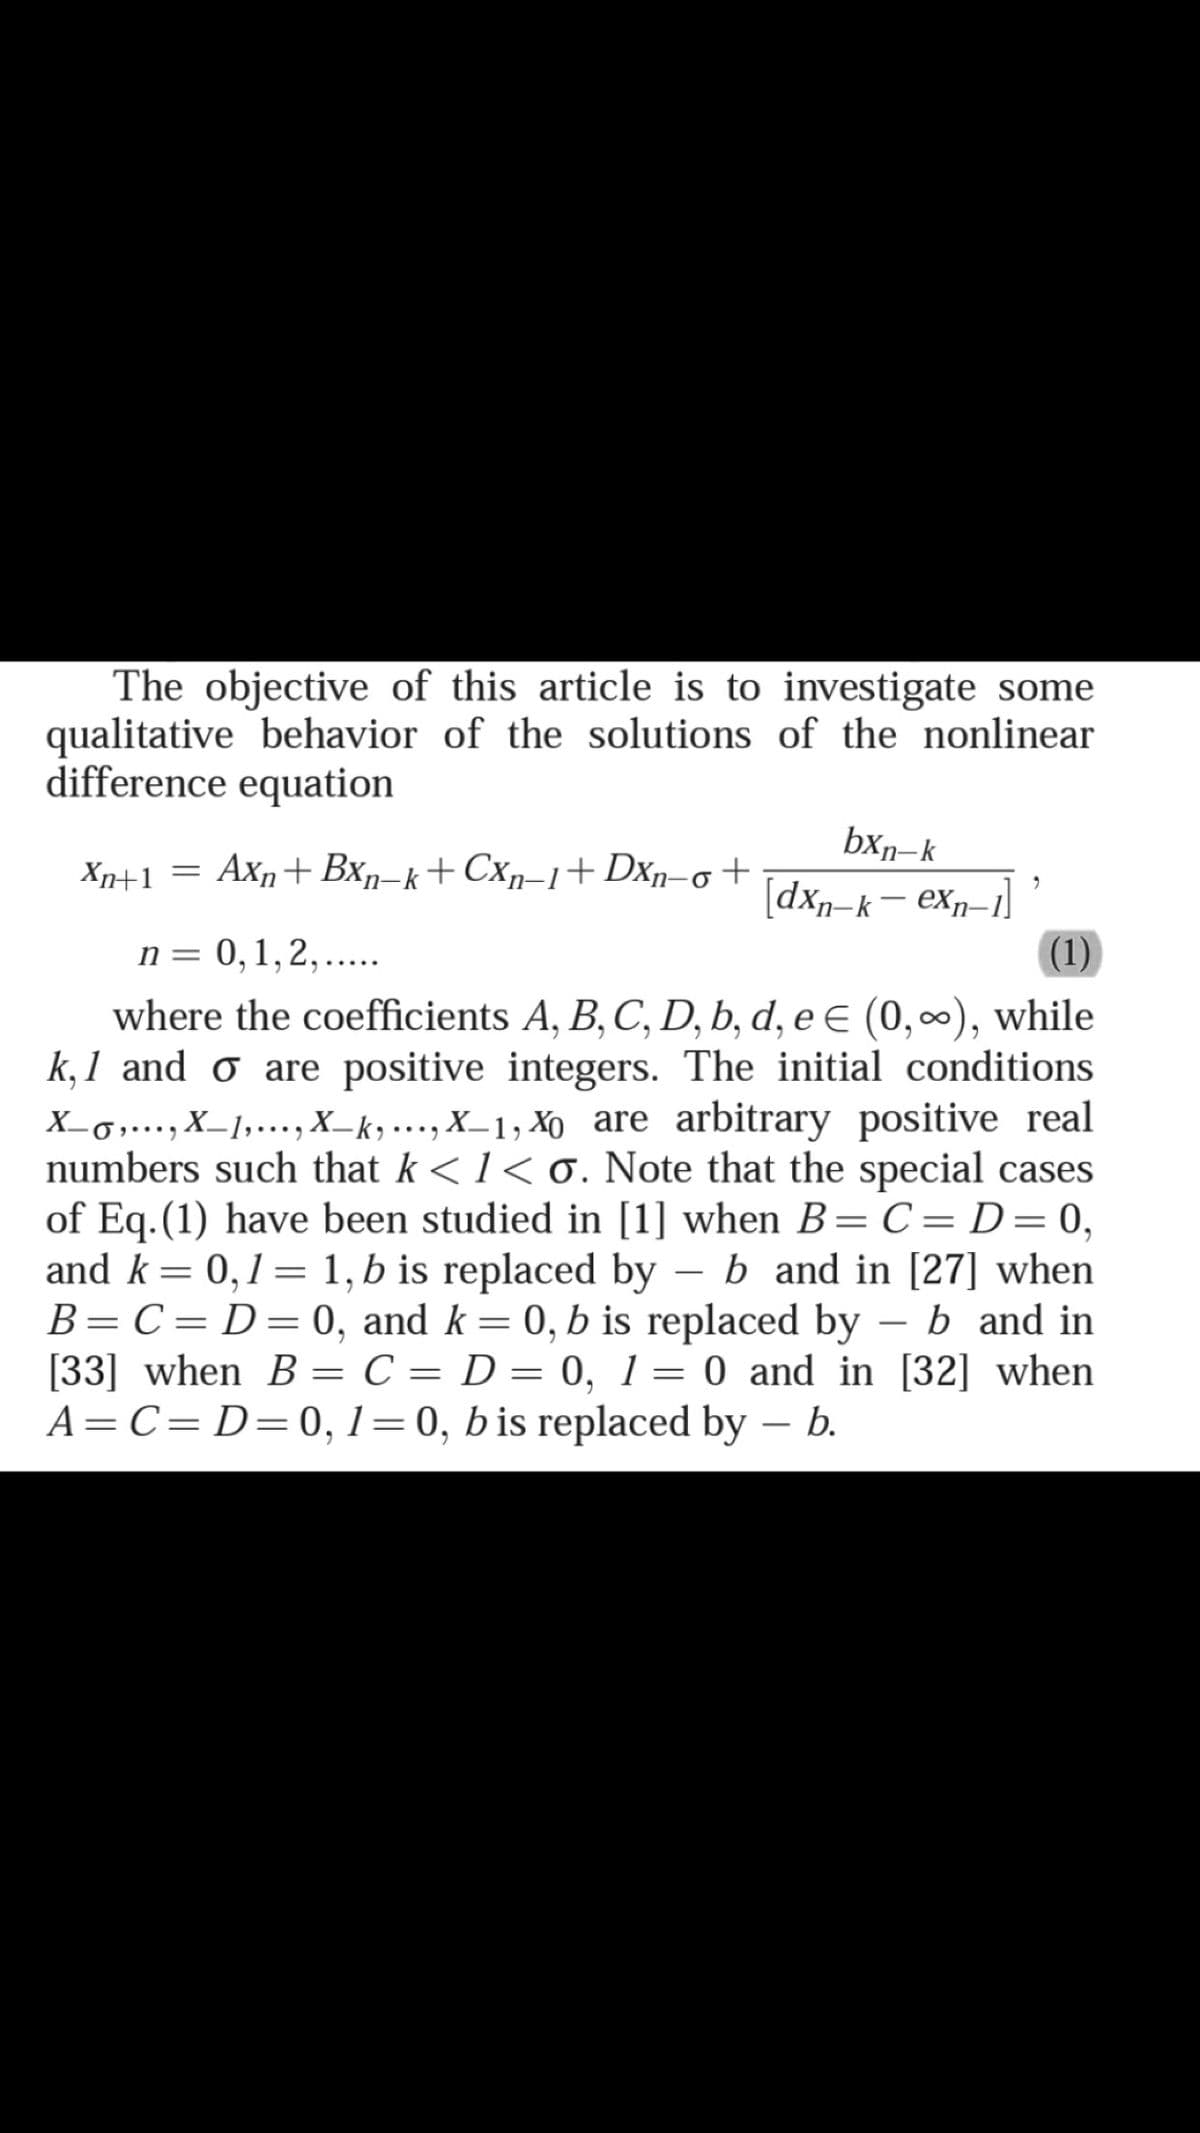 The objective of this article is to investigate some
qualitative behavior of the solutions of the nonlinear
difference equation
bxn-k
Xn+1 = Axn+ Bx–k+Cxn-1+ Dxn-o+
dxn-k– exŋ-
n= 0,1,2,.....
(1)
where the coefficients A, B, C, D, b, d, e E (0,0), while
k, 1 and o are positive integers. The initial conditions
X_g,..., X_1,.., X_k, ….., X_1, X are arbitrary positive real
numbers such that k <1< 0. Note that the special cases
of Eq.(1) have been studied in [1] when B=C= D=0,
and k= 0,1= 1, b is replaced by – b and in [27] when
B=C= D=0, and k= 0, b is replaced by
[33] when B = C = D = 0, 1= 0 and in [32] when
A=C= D=0, 1=0, b is replaced by – b.
b and in
%3|
